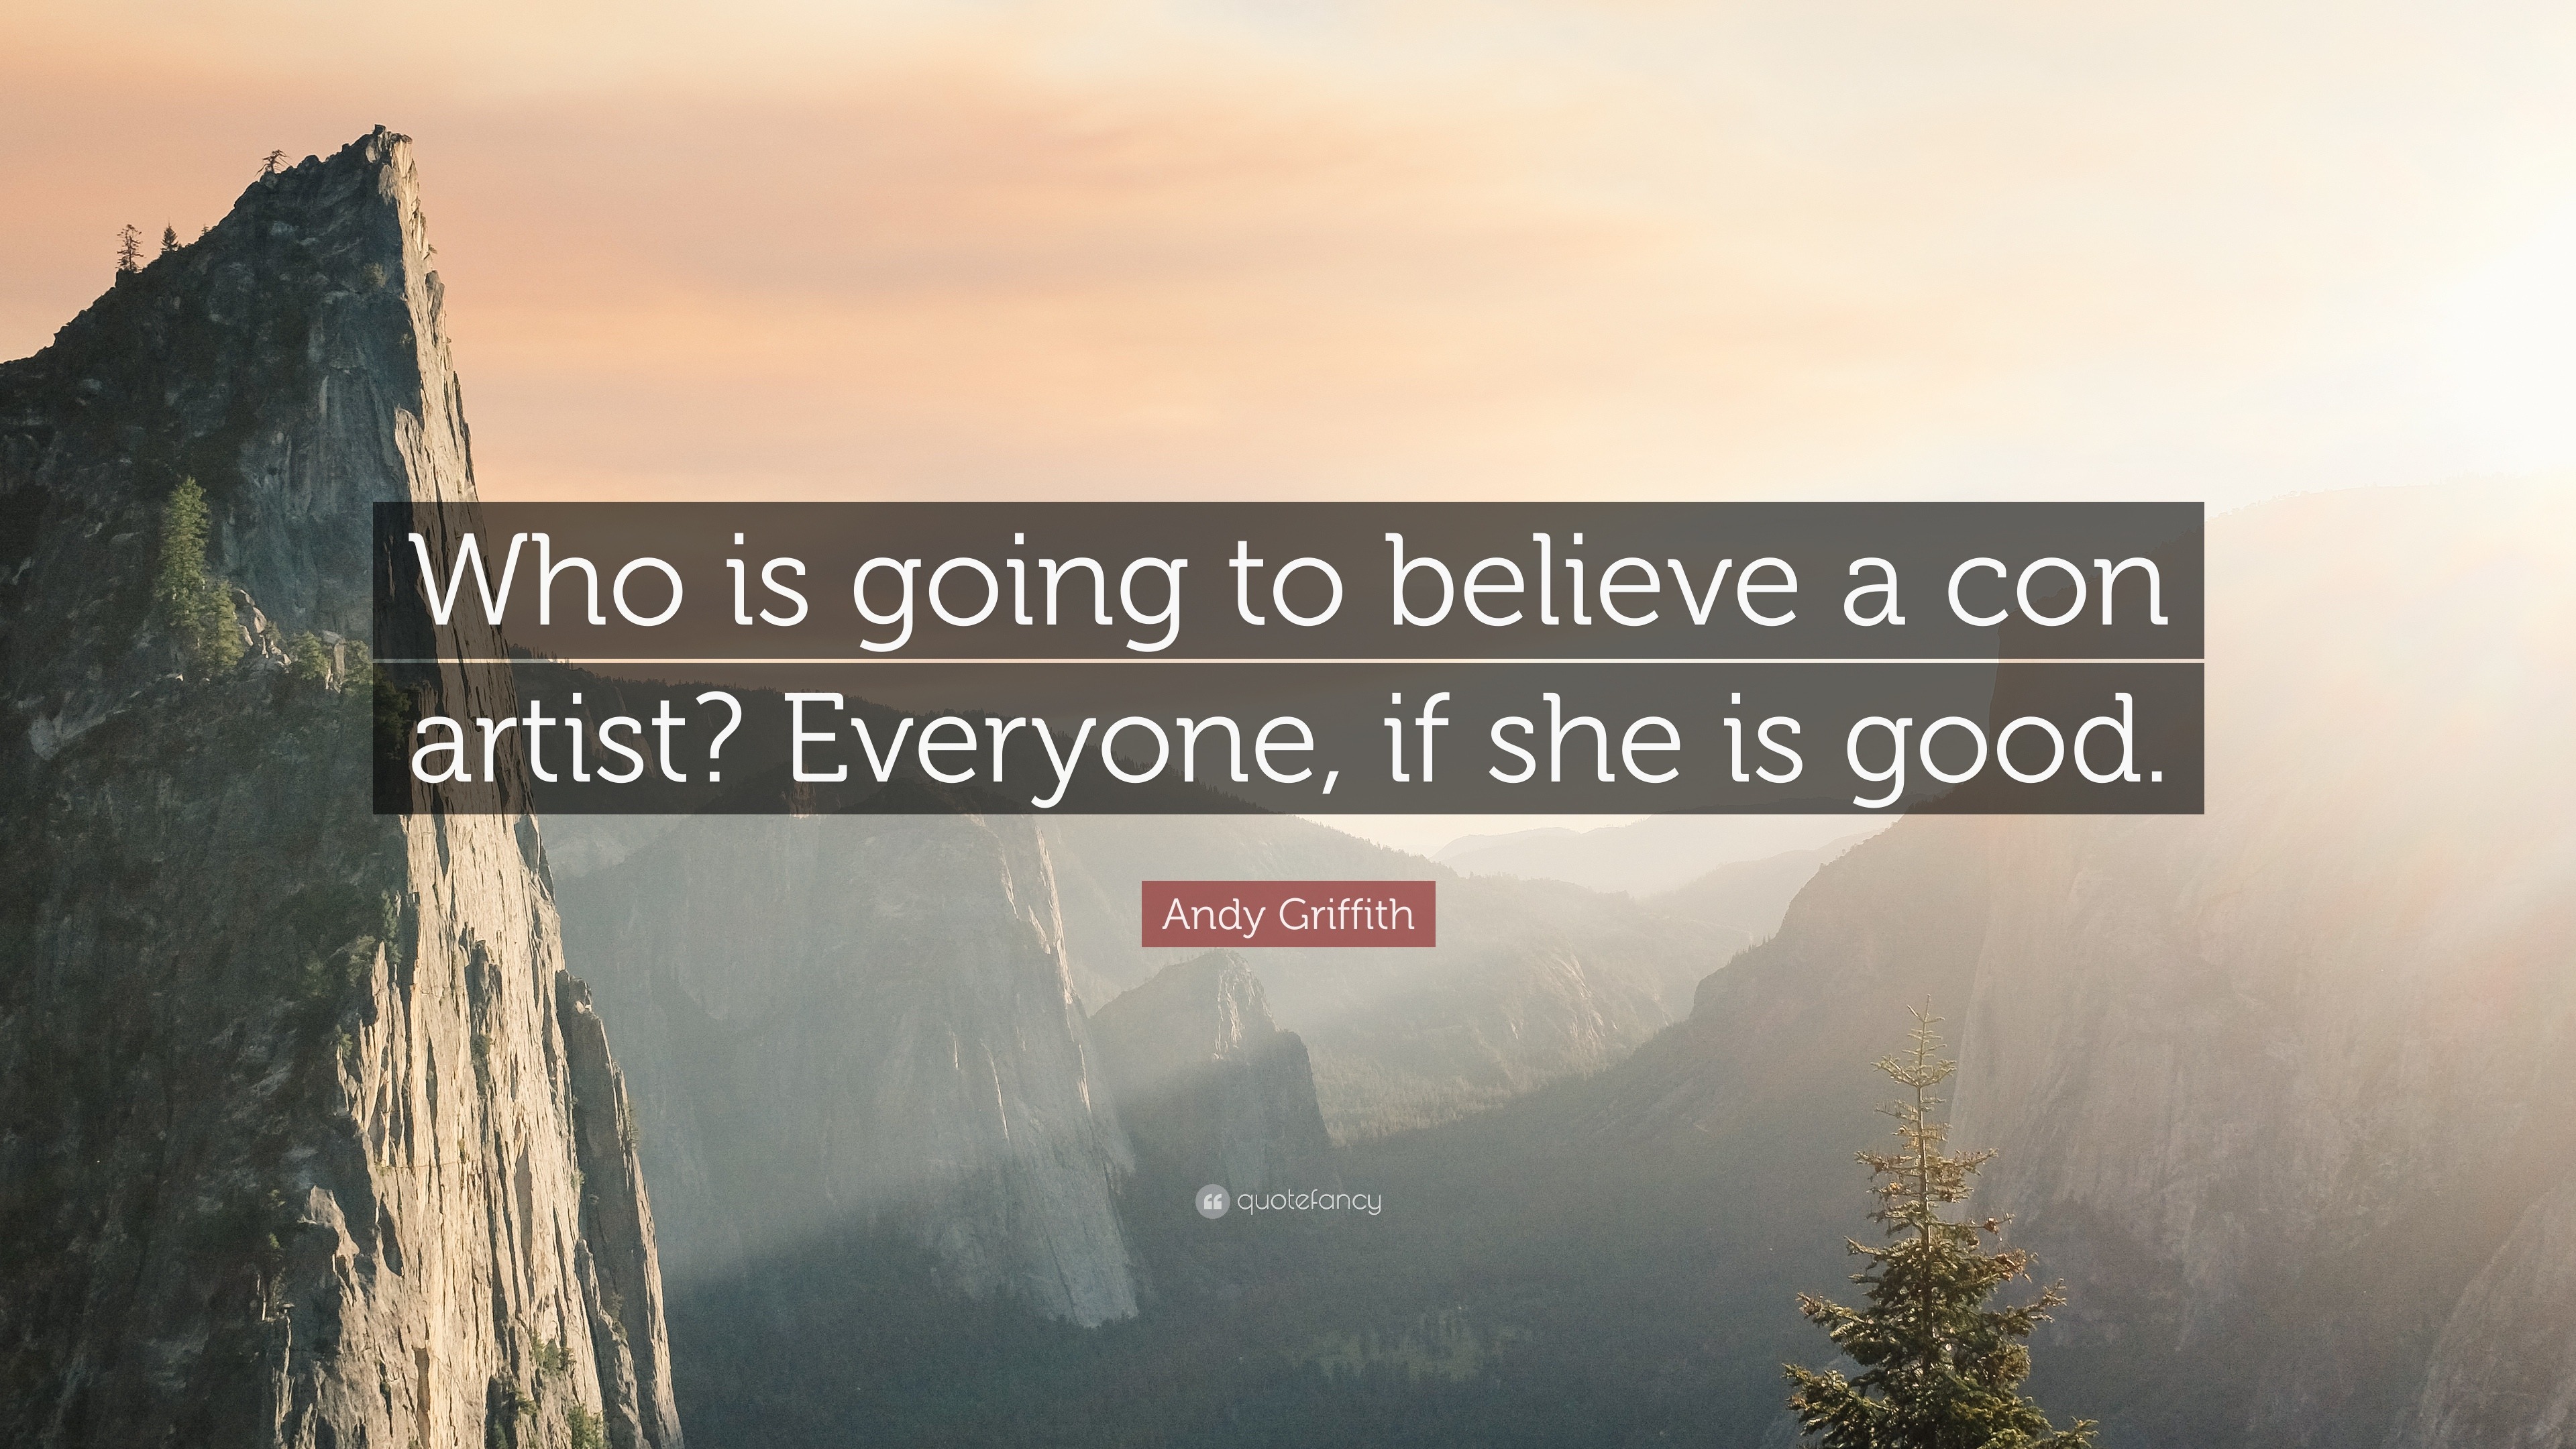 Andy Griffith Quote: “Who is going to believe a con artist? Everyone, if  she is good.”